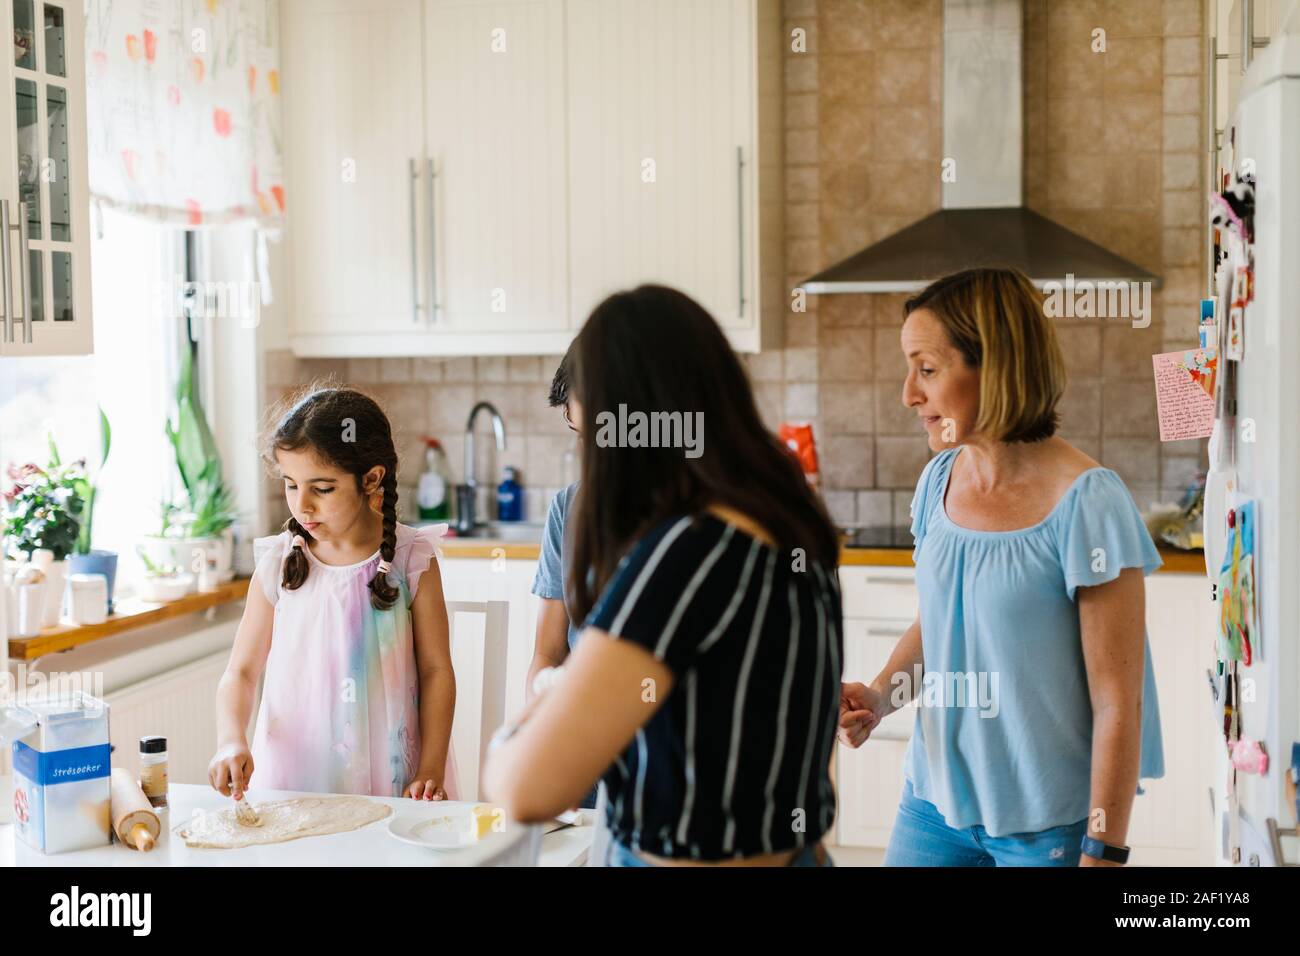 Mother with children in kitchen Stock Photo